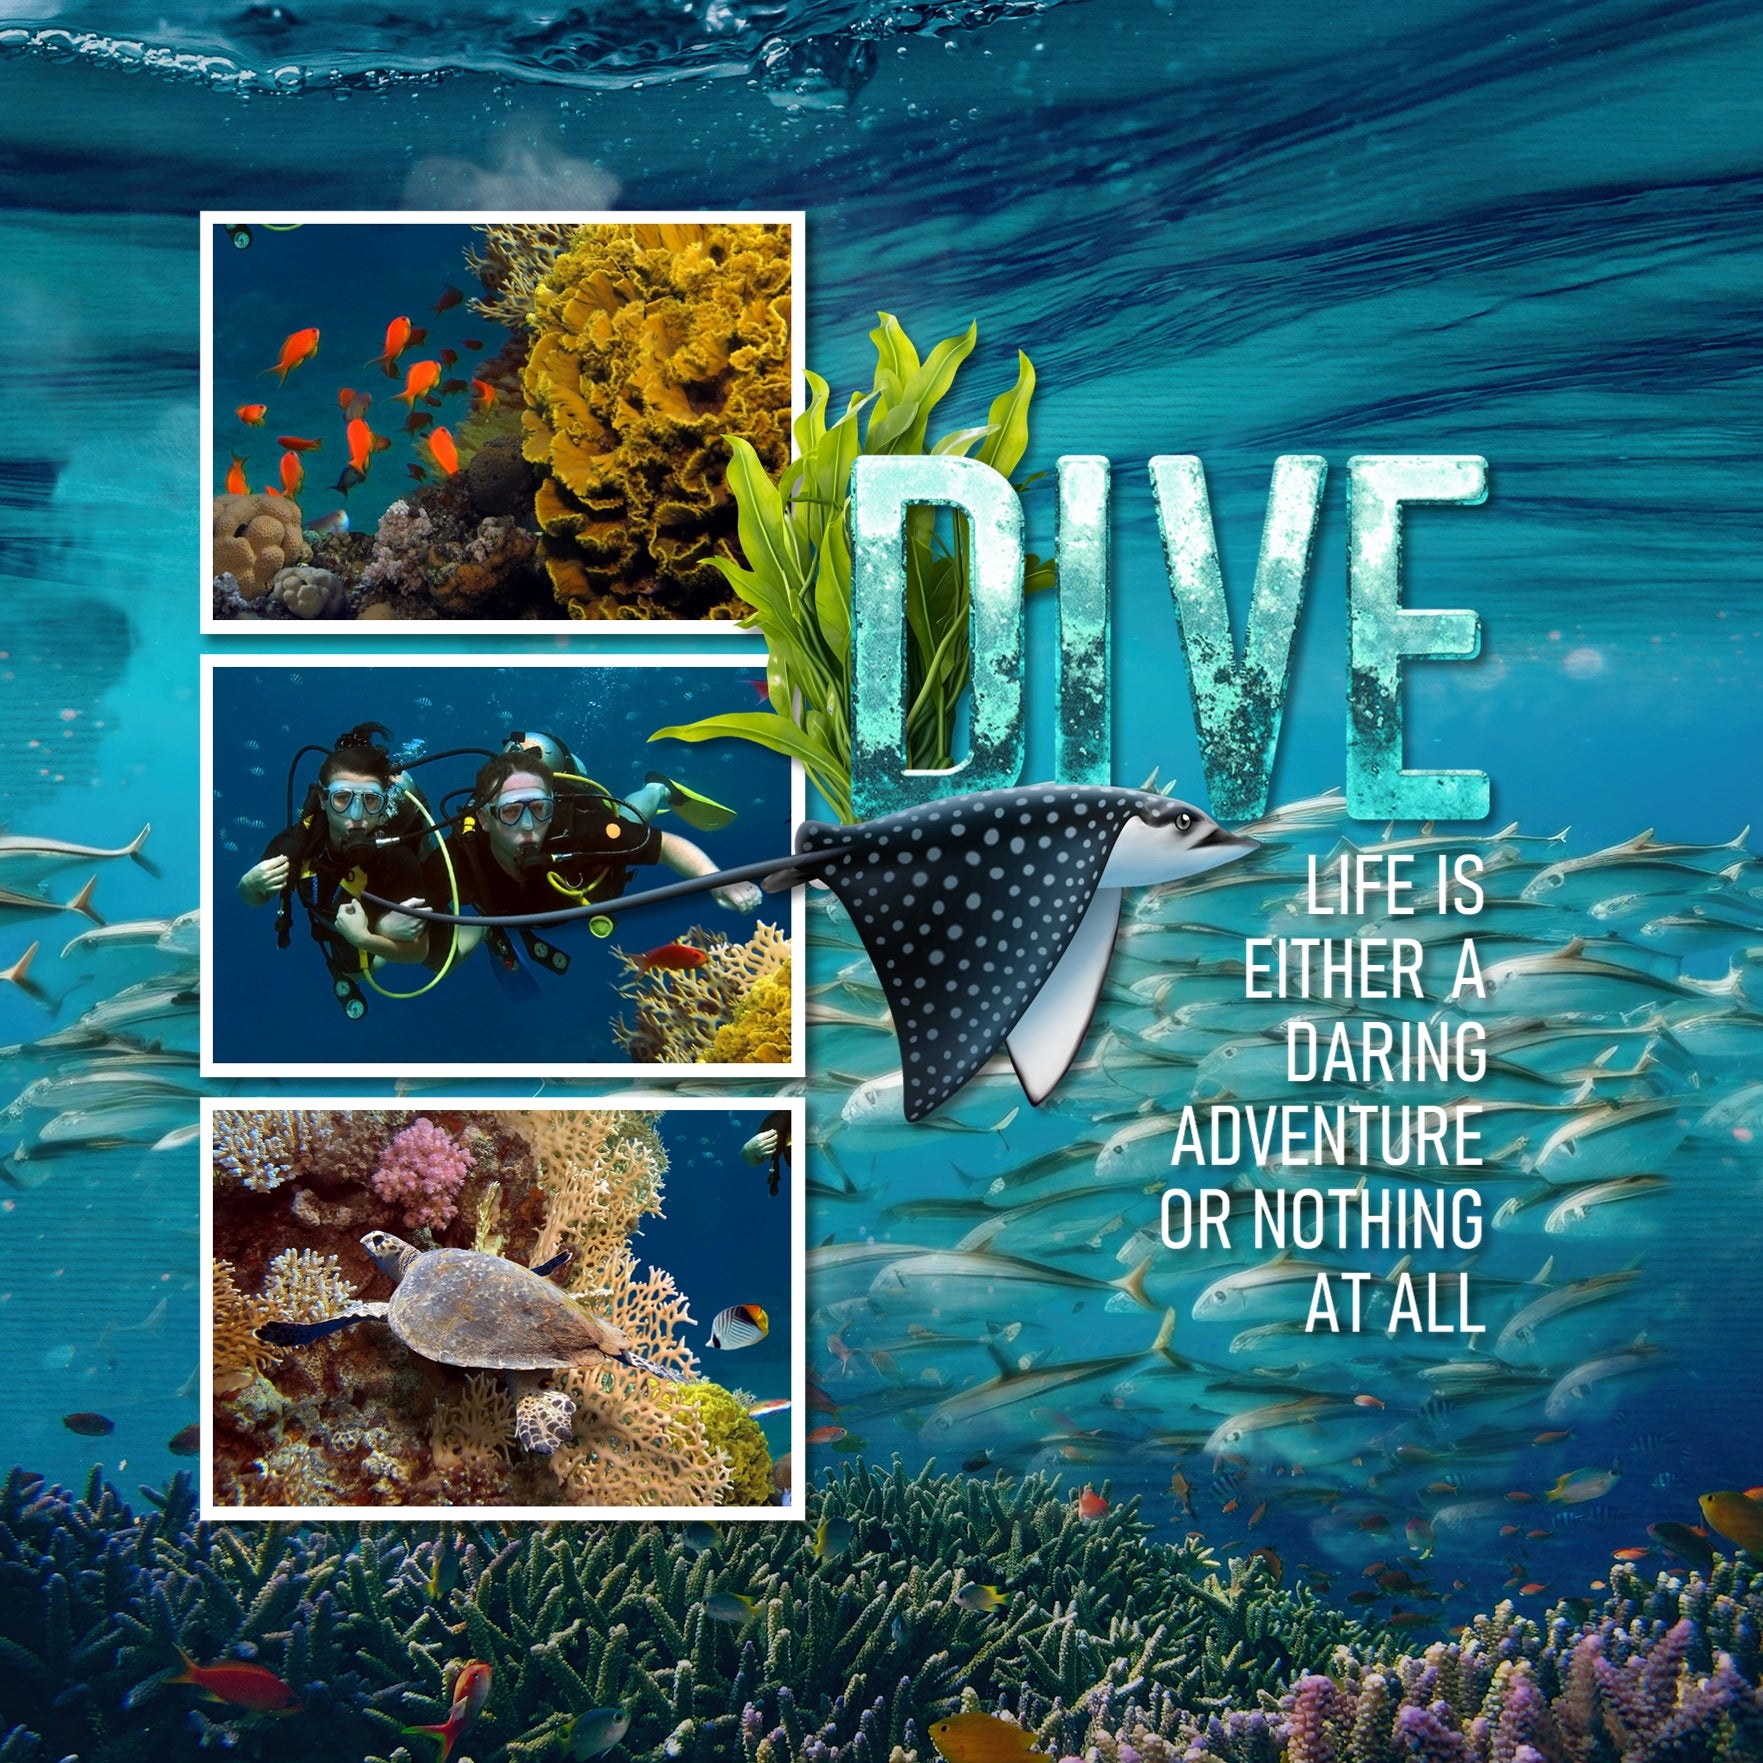 Highlight your vacation memories with these underwater digital papers by Lucky Girl Creative. Great for digital scrapbooking holidays to the beach, Great Barrier Reef, Hawaii, the Caribbean Sea, Florida, and other scuba dive, snorkel, and swim adventures. They can even be used for trips to the aquarium, too!